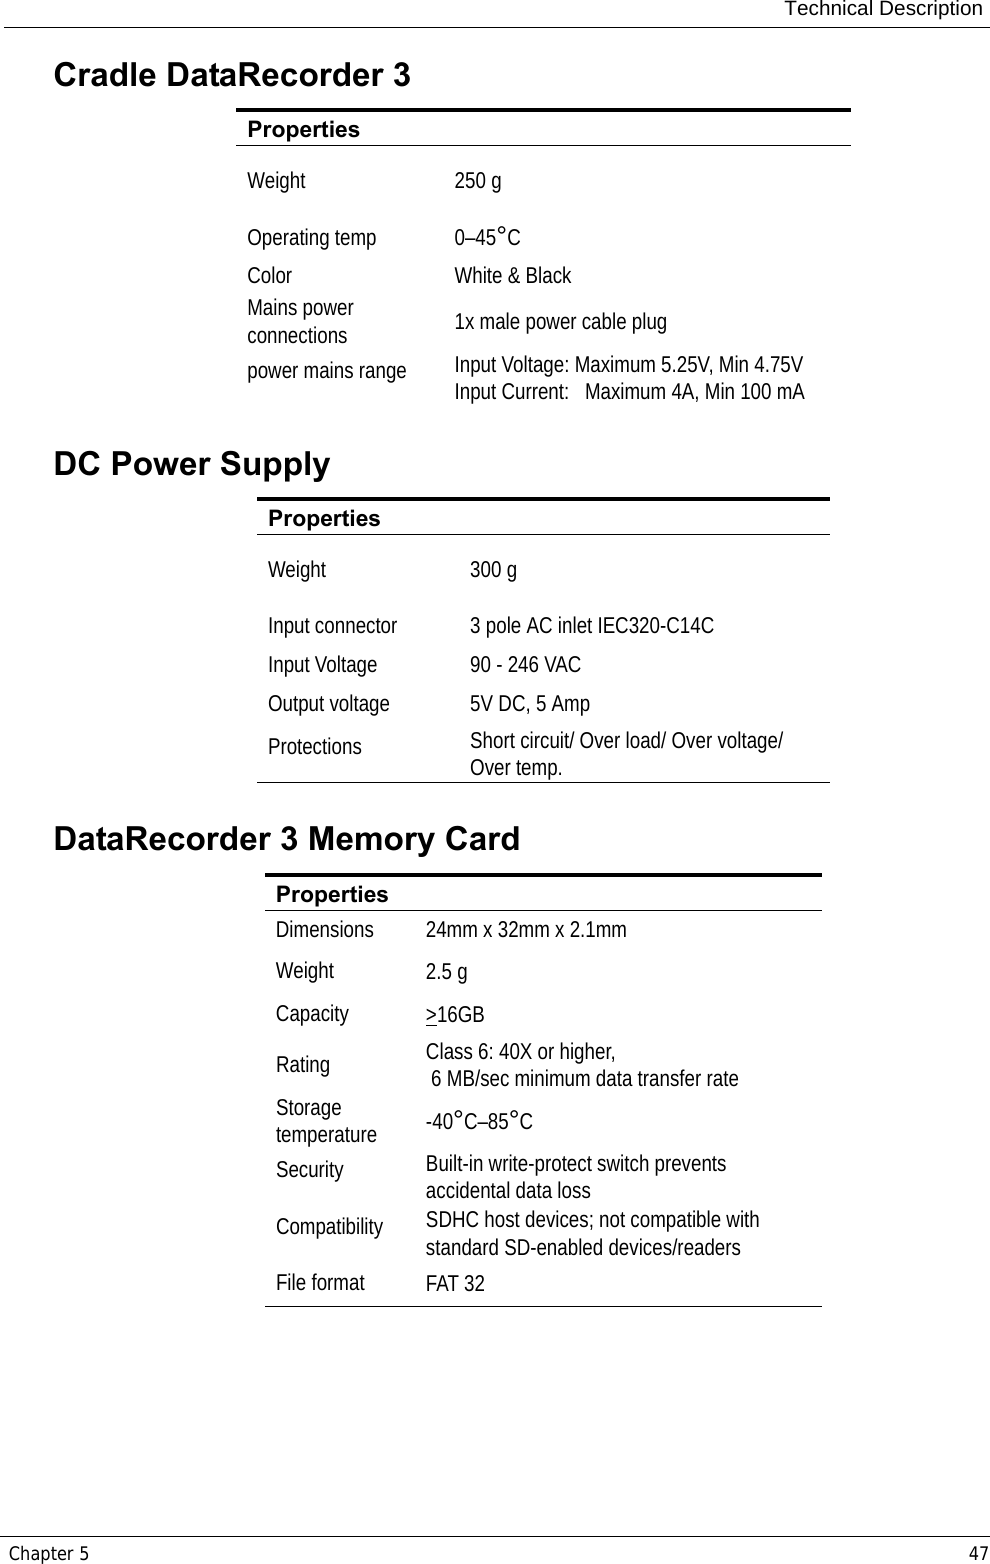 Technical DescriptionChapter 5 47Cradle DataRecorder 3DC Power SupplyDataRecorder 3 Memory CardPropertiesWeight 250 gOperating temp  0–45°CColor White &amp; BlackMains power connections 1x male power cable plugpower mains range Input Voltage: Maximum 5.25V, Min 4.75VInput Current:   Maximum 4A, Min 100 mAPropertiesWeight 300 gInput connector  3 pole AC inlet IEC320-C14CInput Voltage 90 - 246 VACOutput voltage 5V DC, 5 AmpProtections Short circuit/ Over load/ Over voltage/ Over temp.PropertiesDimensions 24mm x 32mm x 2.1mmWeight 2.5 gCapacity &gt;16GBRating Class 6: 40X or higher, 6 MB/sec minimum data transfer rate Storage temperature -40°C–85°CSecurity Built-in write-protect switch prevents accidental data loss Compatibility SDHC host devices; not compatible with standard SD-enabled devices/readers File format FAT 32 